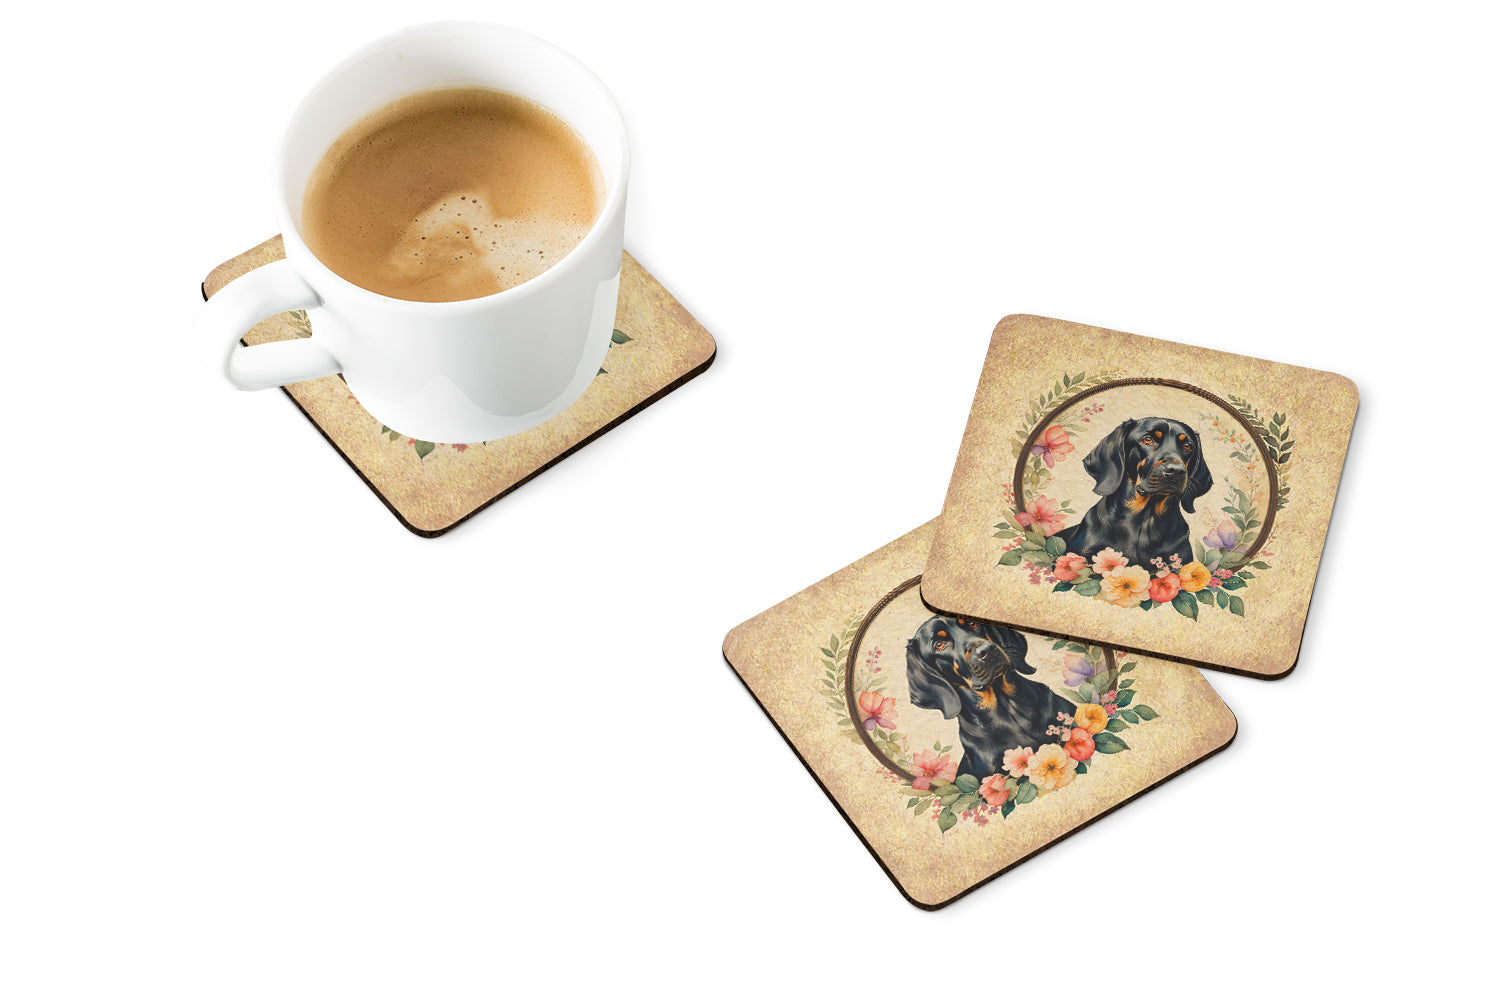 Buy this Black and Tan Coonhound and Flowers Foam Coasters